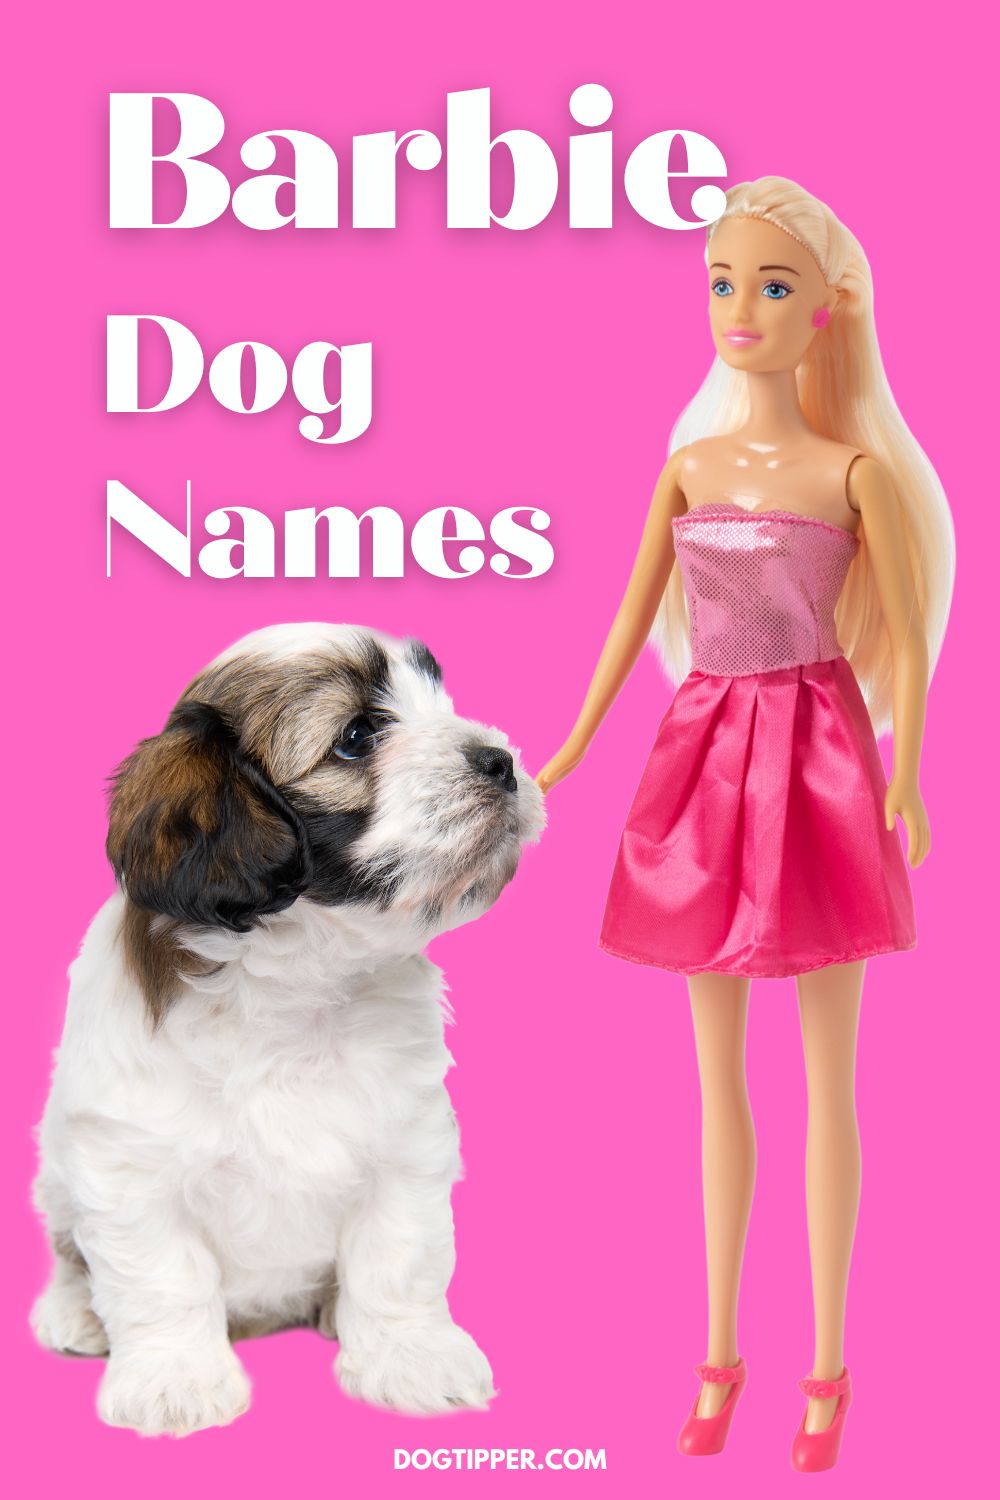 Barbie dog names for your new puppy